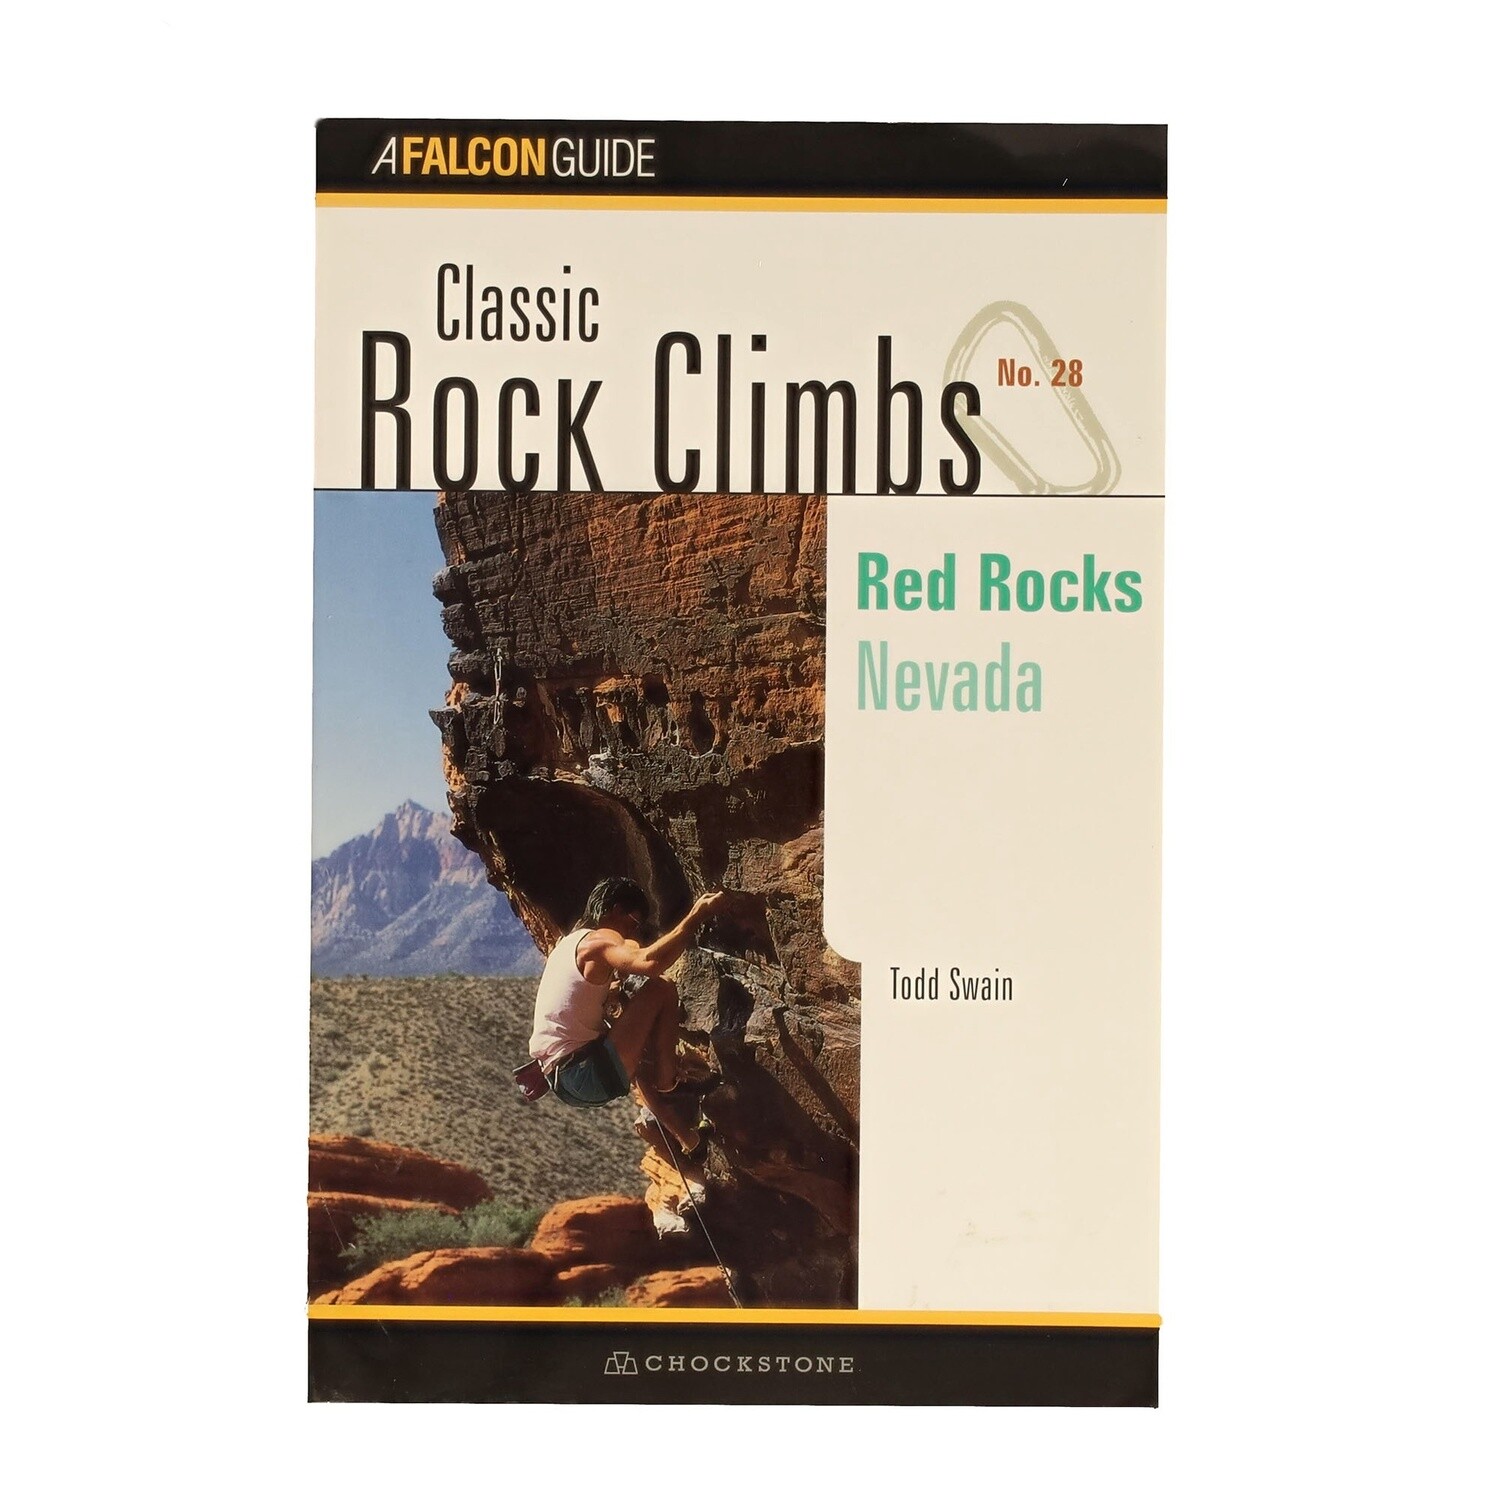 Classic Rock Climbs No. 28 - Red Rocks Nevada by Todd Swain